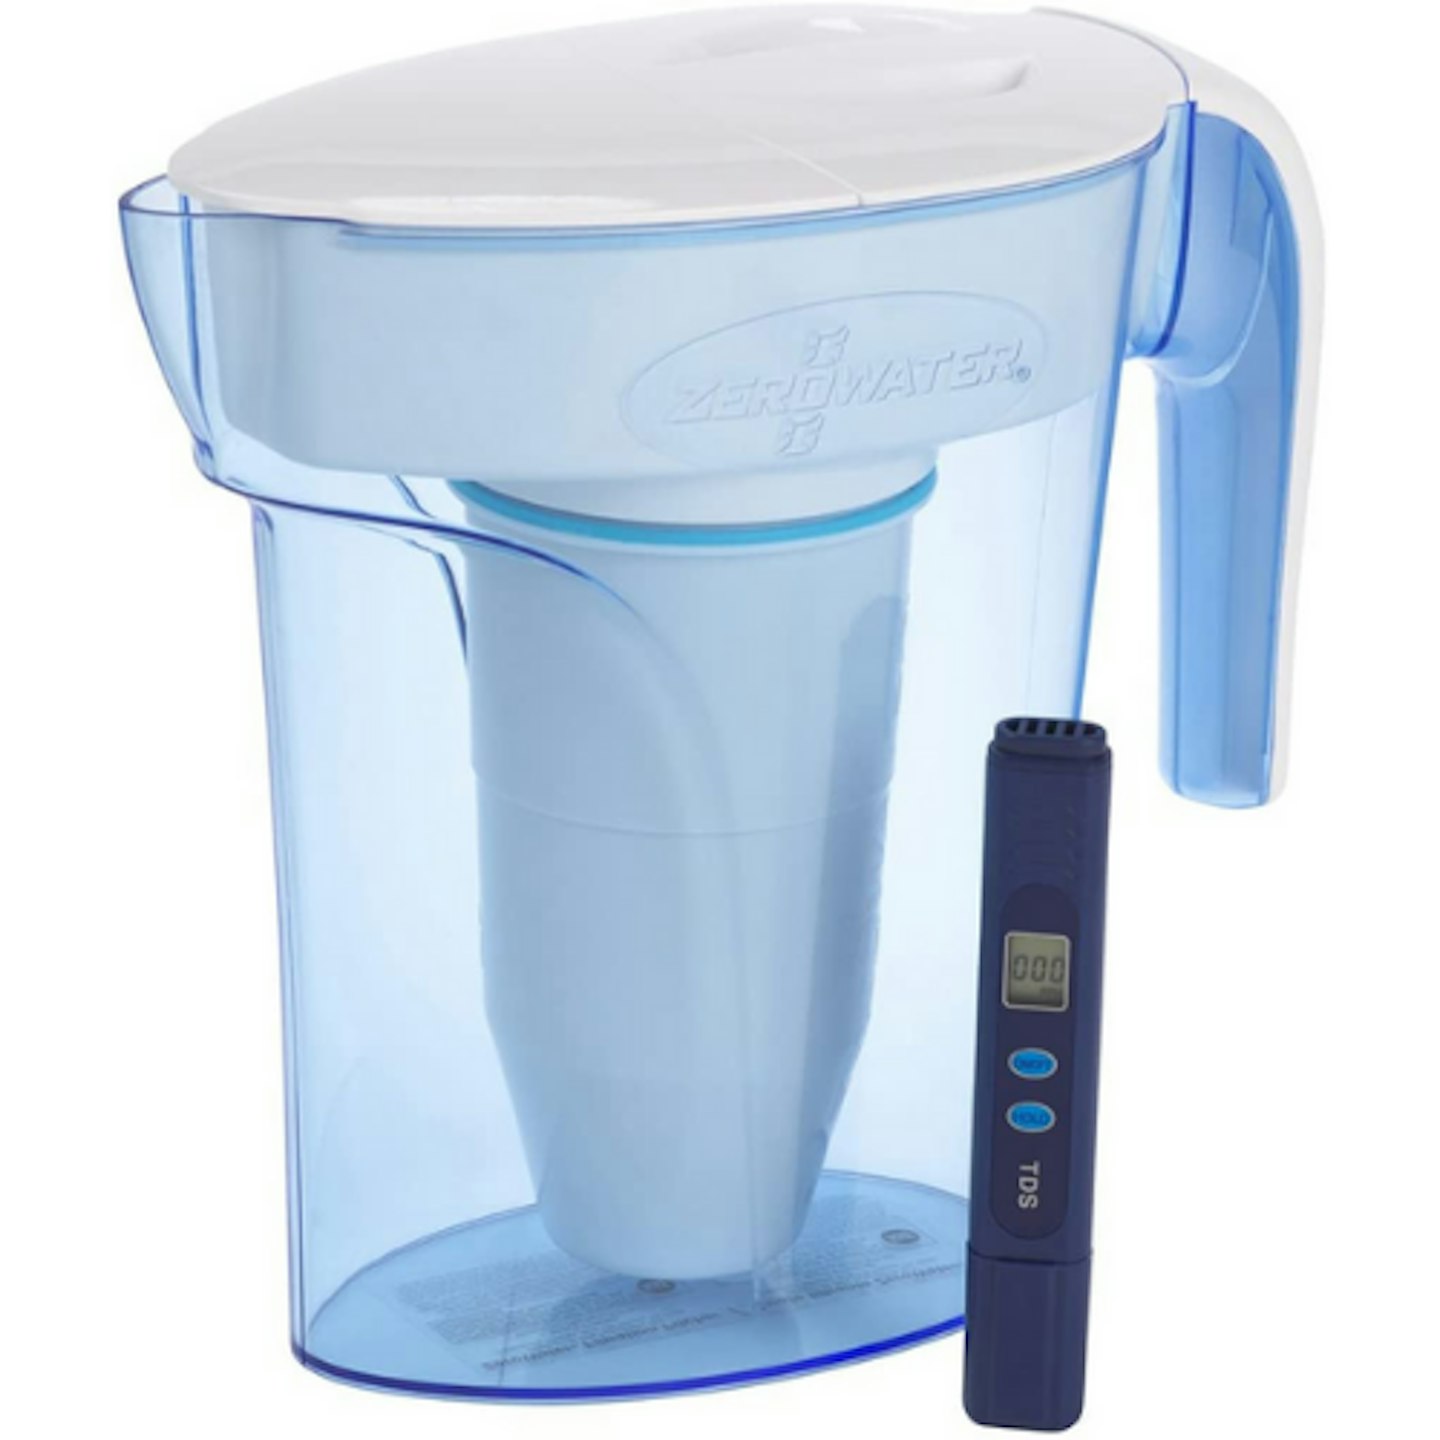 ZeroWater 7 Cup Water Filter Jug With Advanced 5 Stage Filter